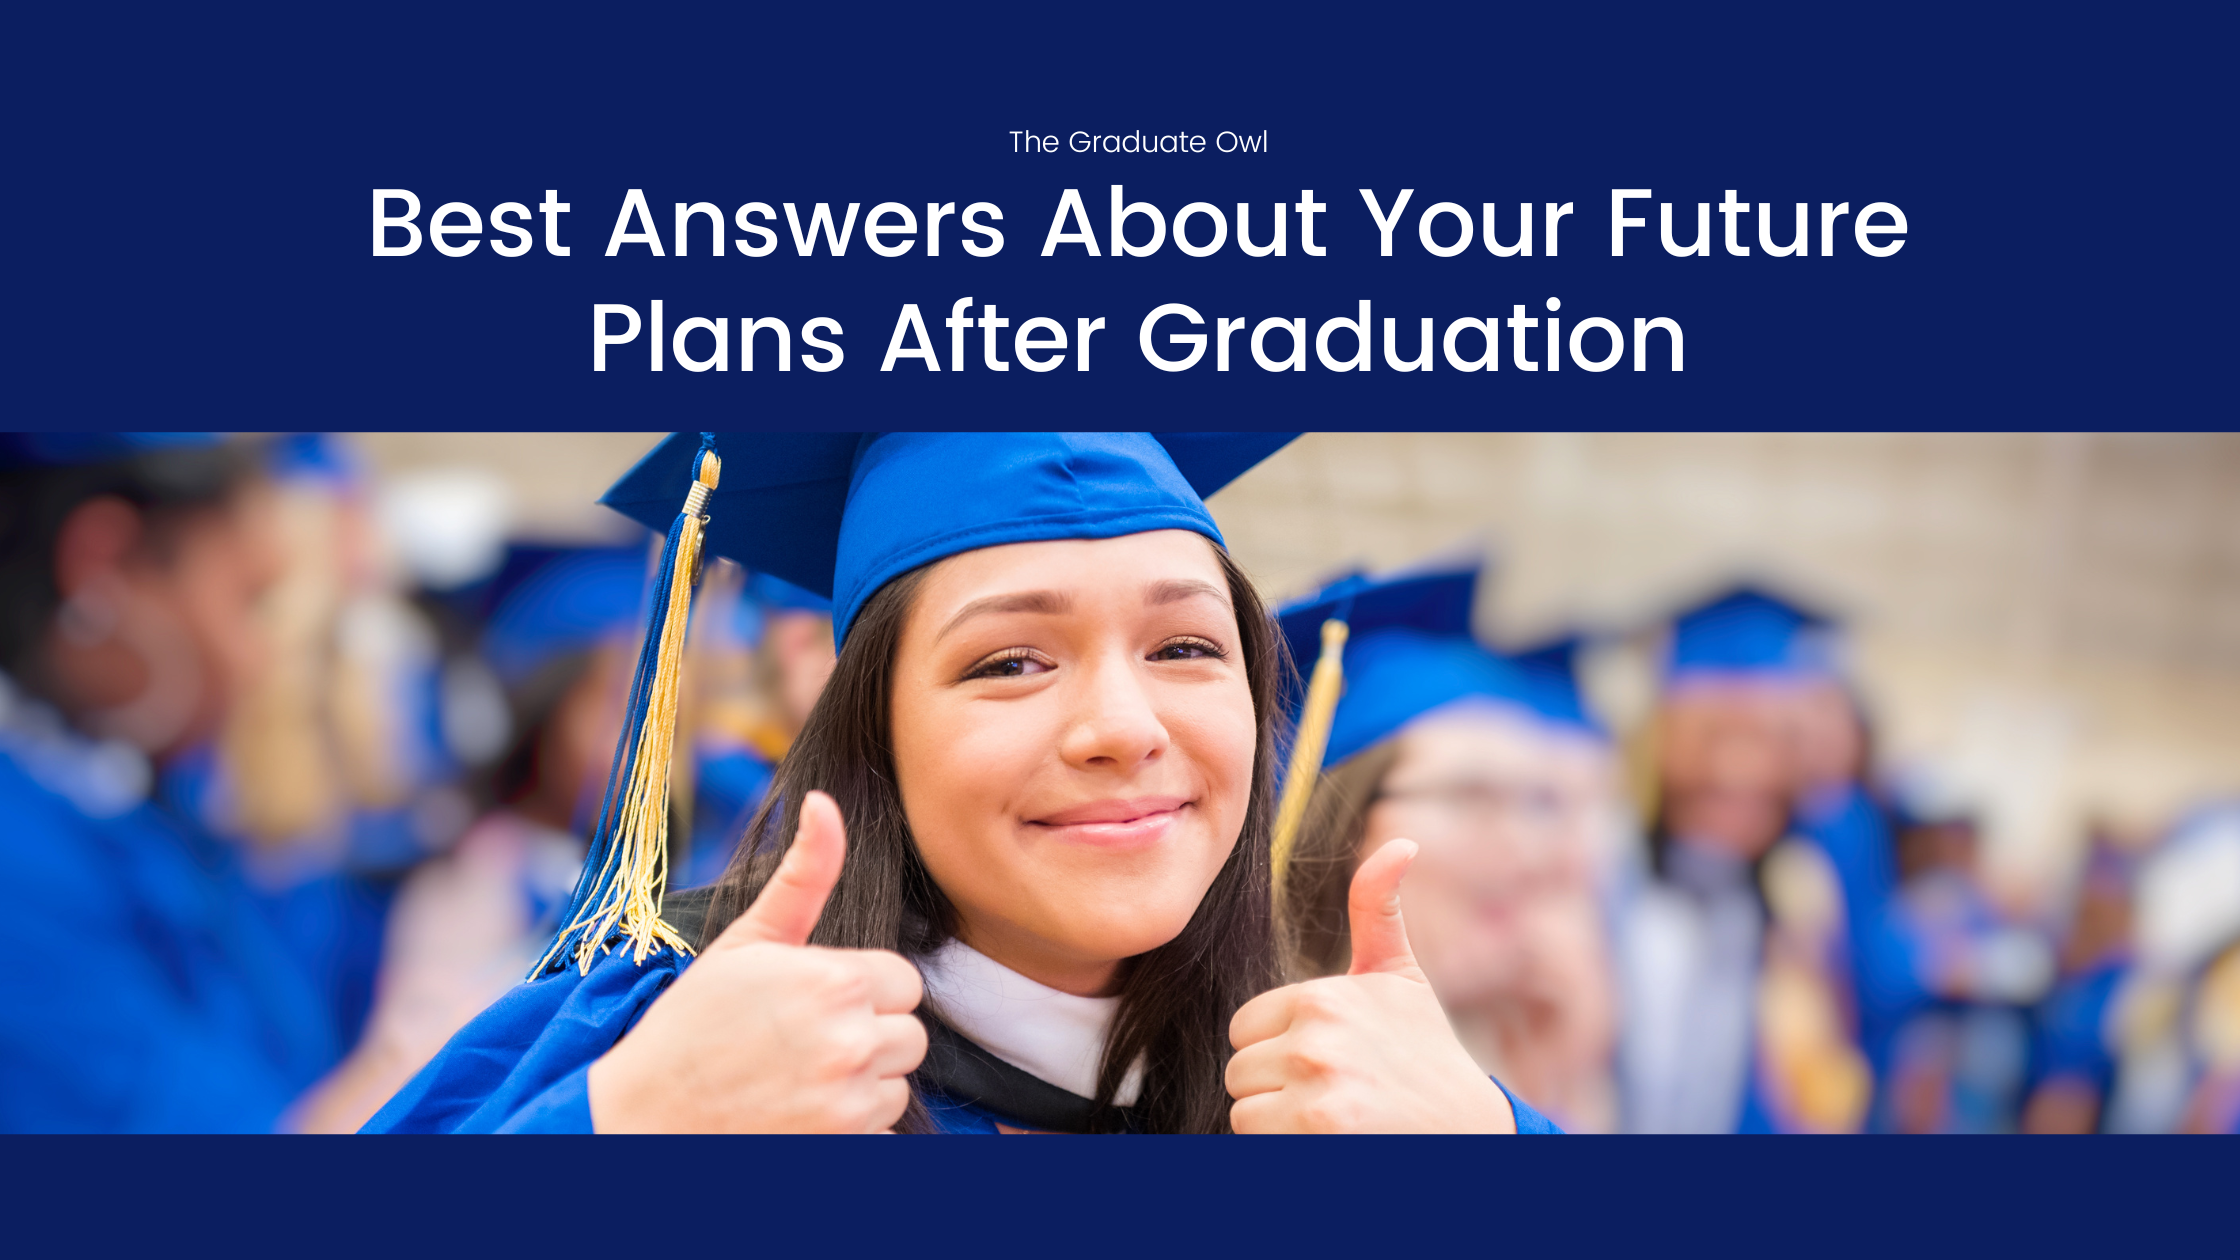 write an essay about your future plans after graduation